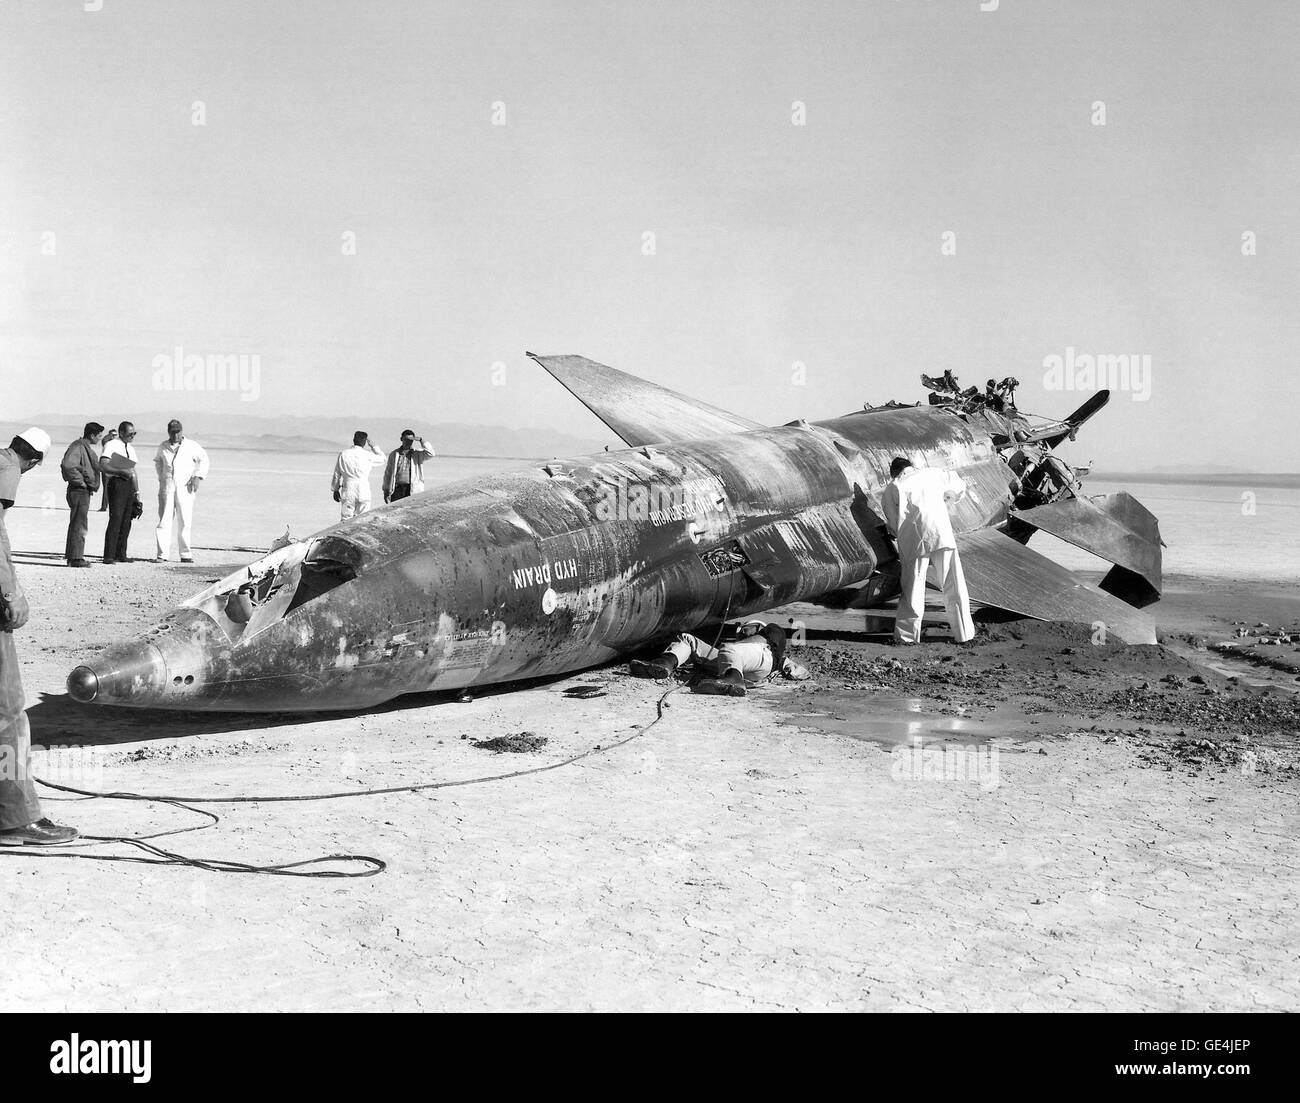 (November 9, 1962) An engine failure forced Jack McKay, a NASA research pilot, to make an emergency landing at Mud Lake, Nevada, in the second X-15. The aircraft's landing gear collapsed and the X-15 flipped over on its back. McKay was promptly rescued by an Air Force medical team standing by near the launch site, and eventually recovered to fly the X-15 again. But his injuries, more serious than at first thought, eventually forced his retirement from NASA. The aircraft was sent back to the manufacturer, where it underwent extensive repairs and modifications. It returned to Edwards in February Stock Photo